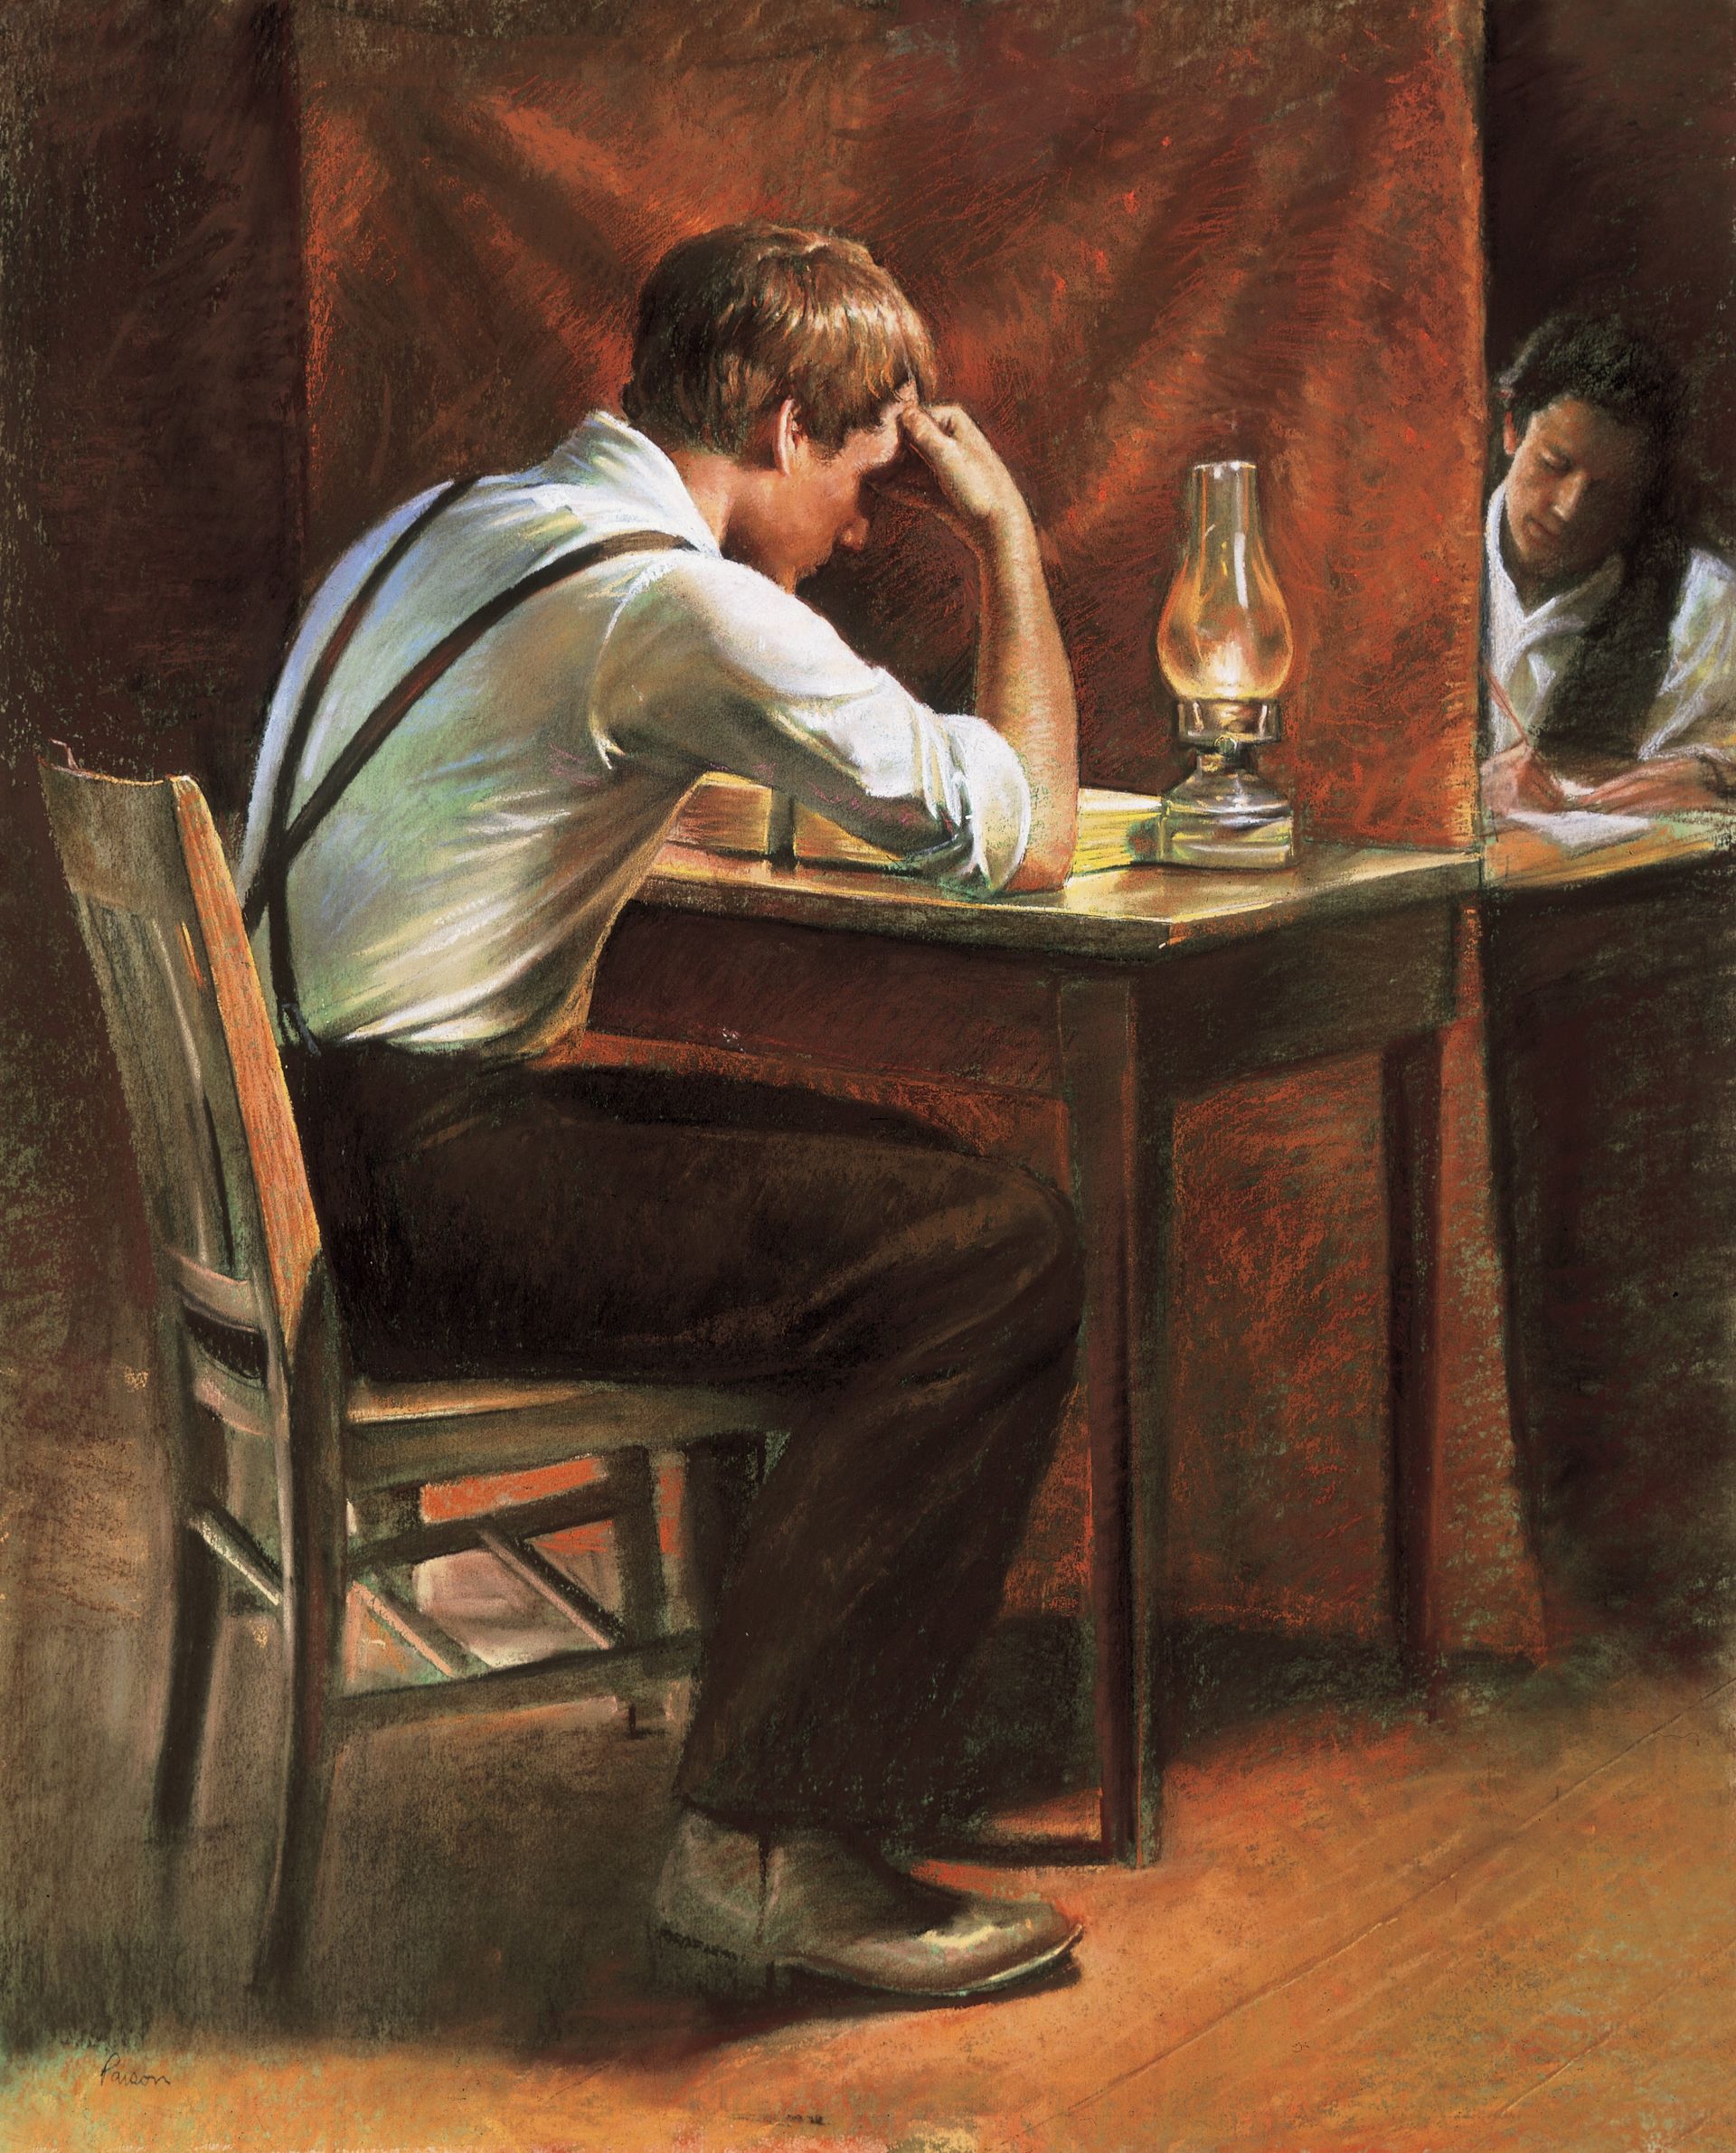 Joseph Smith Translating (Joseph Smith Translating the Gold Plates), by Del Parson; Primary manual 5-14